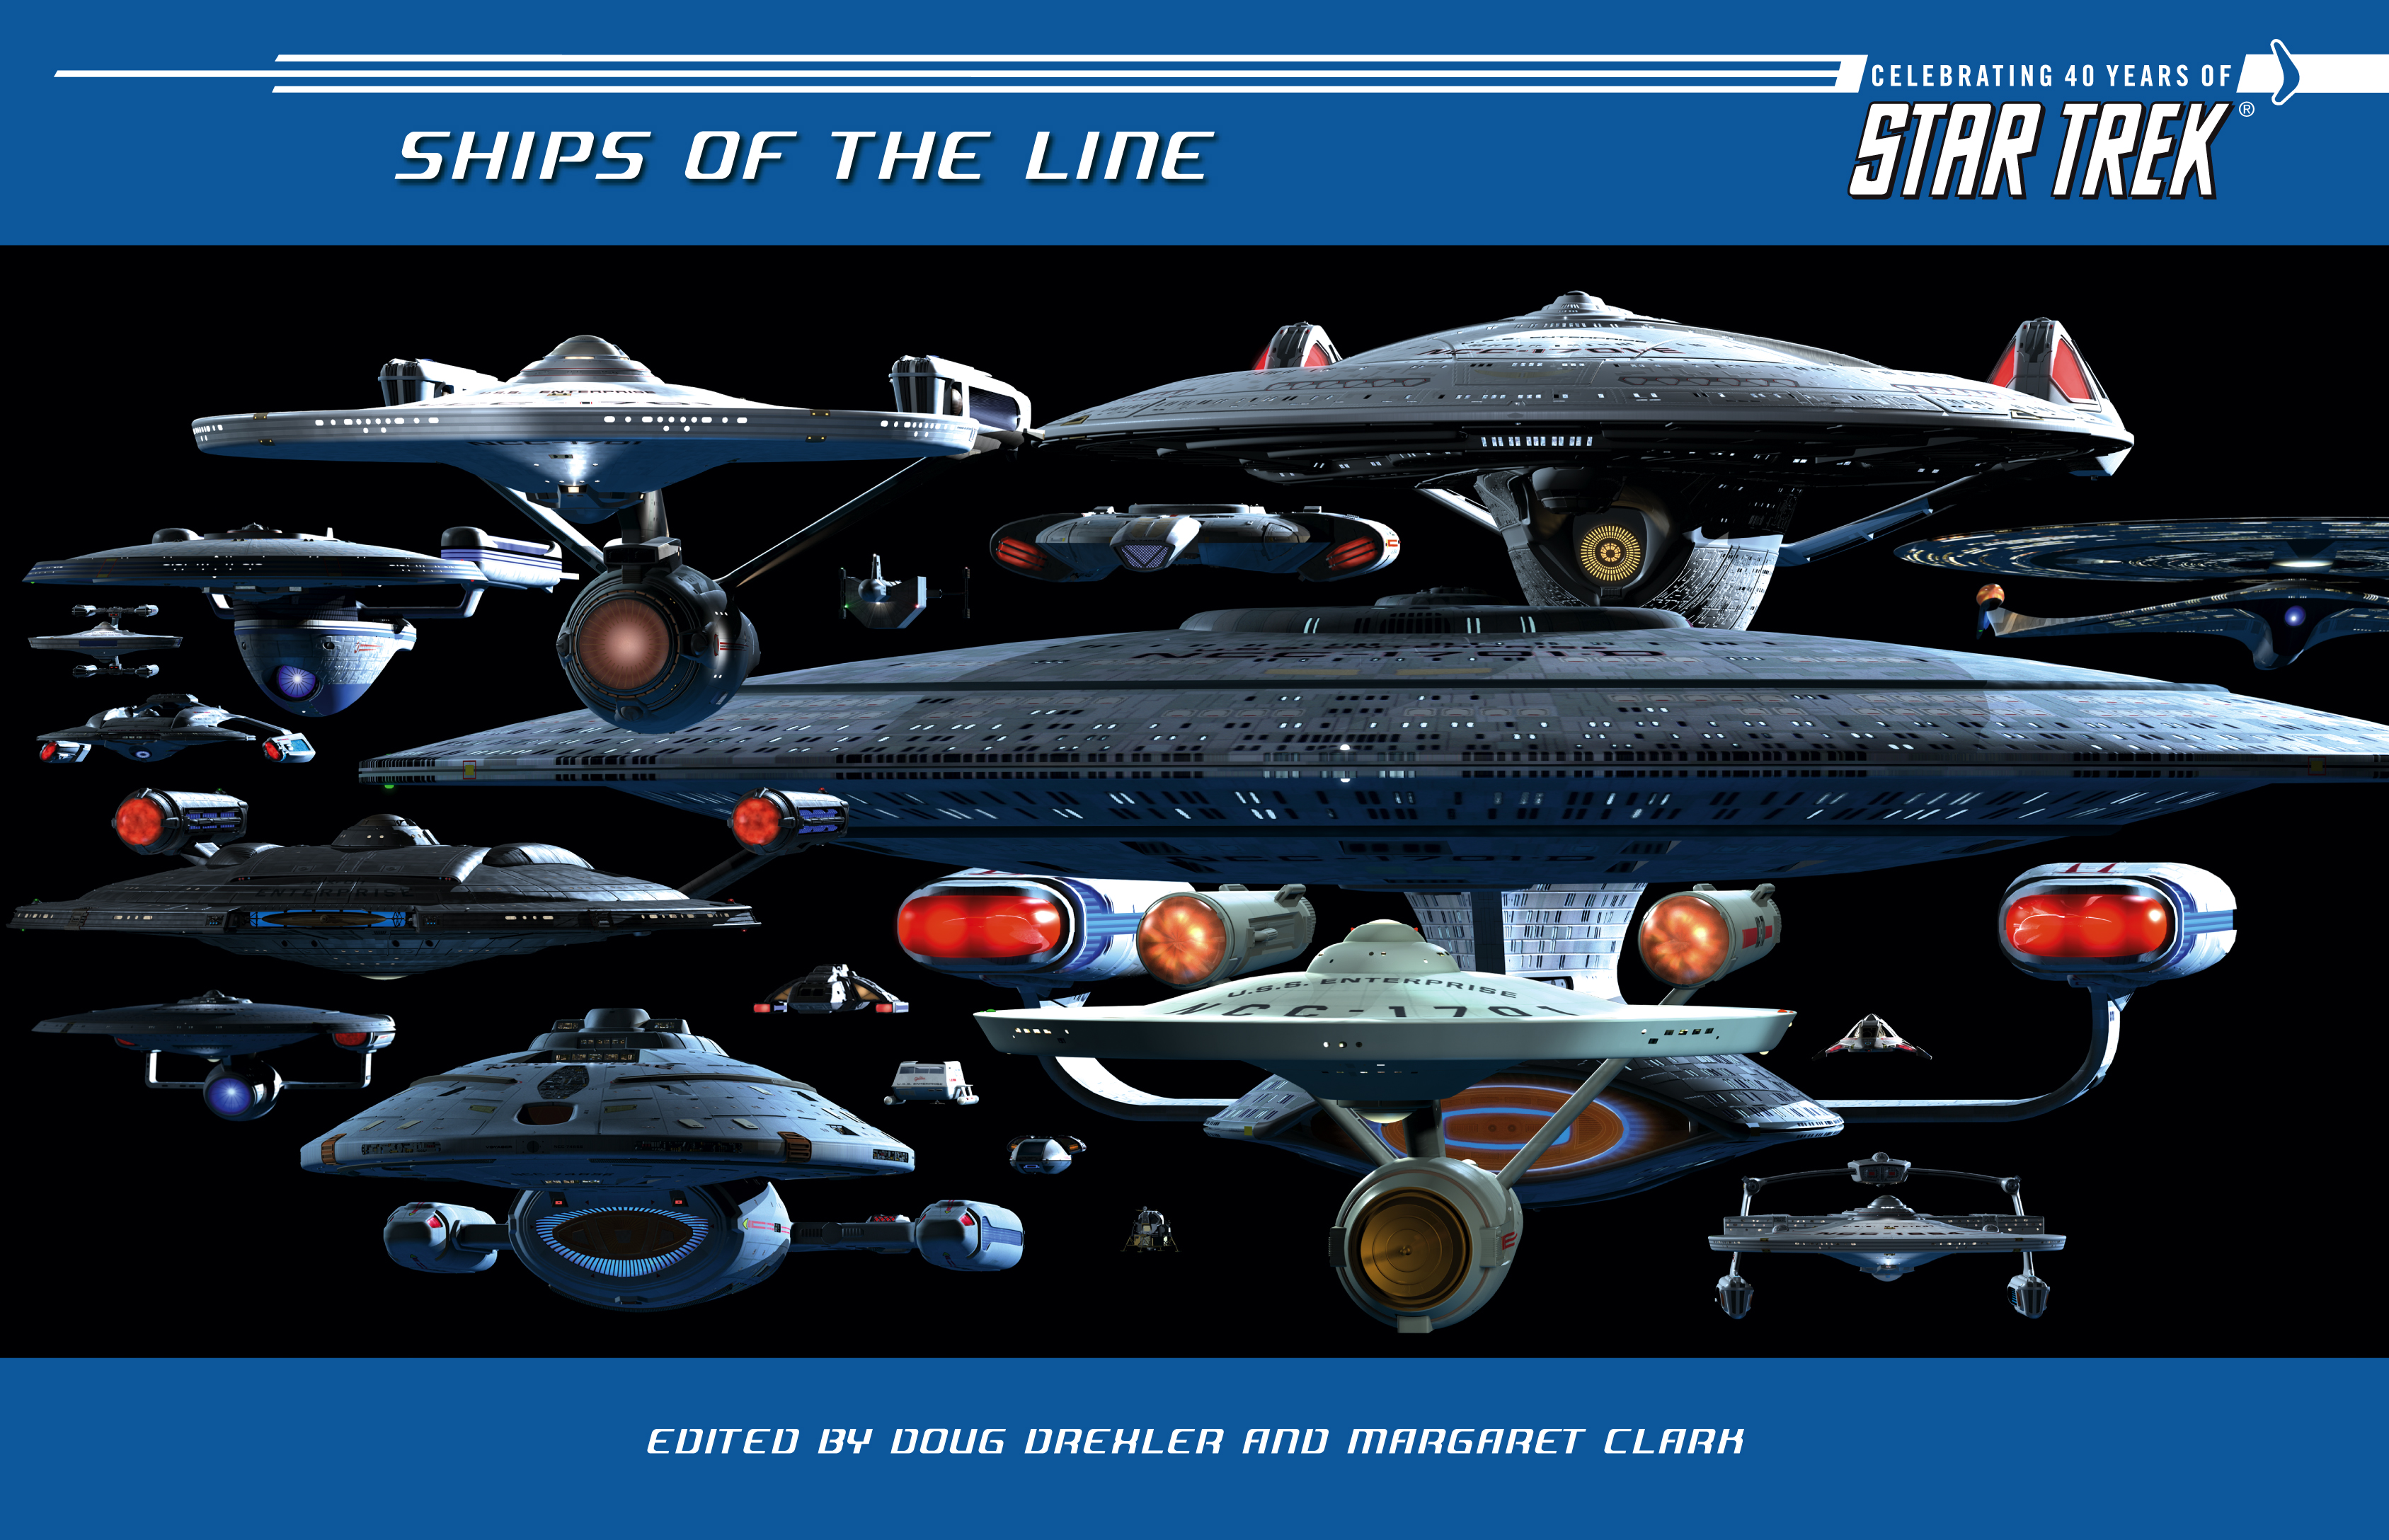 “Star Trek: Ships of the Line” Review by Myconfinedspace.com